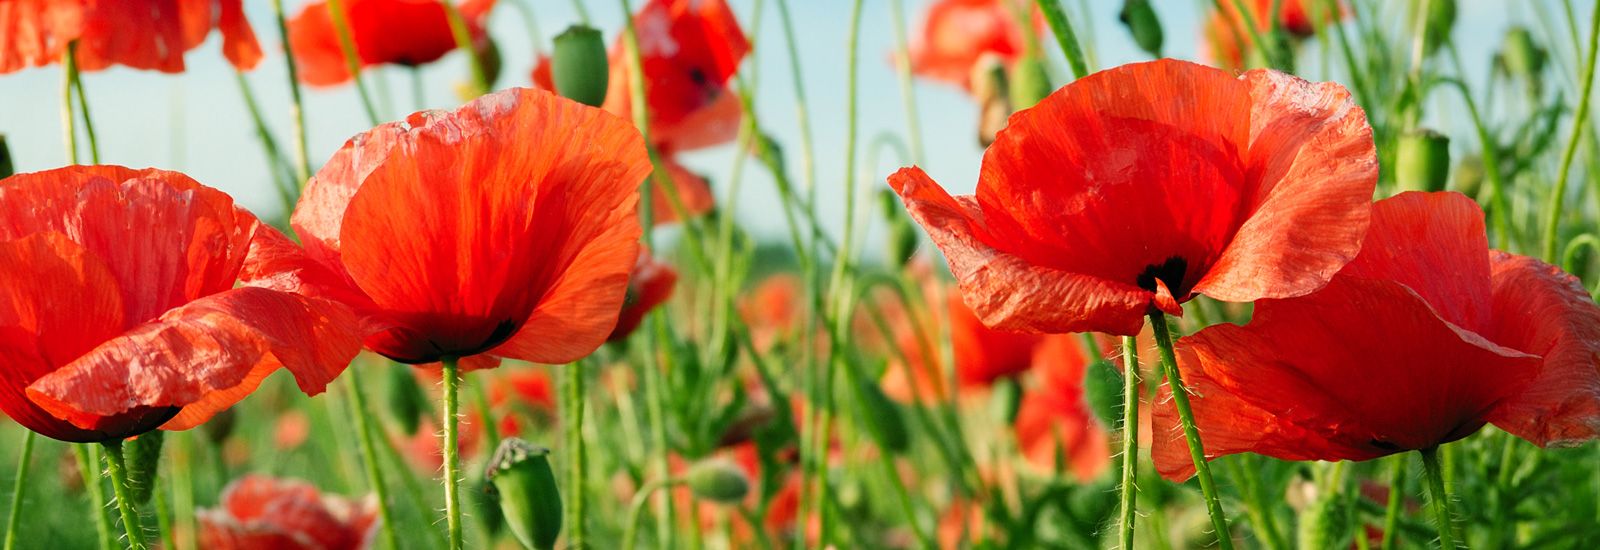 Red poppies growing in a field.